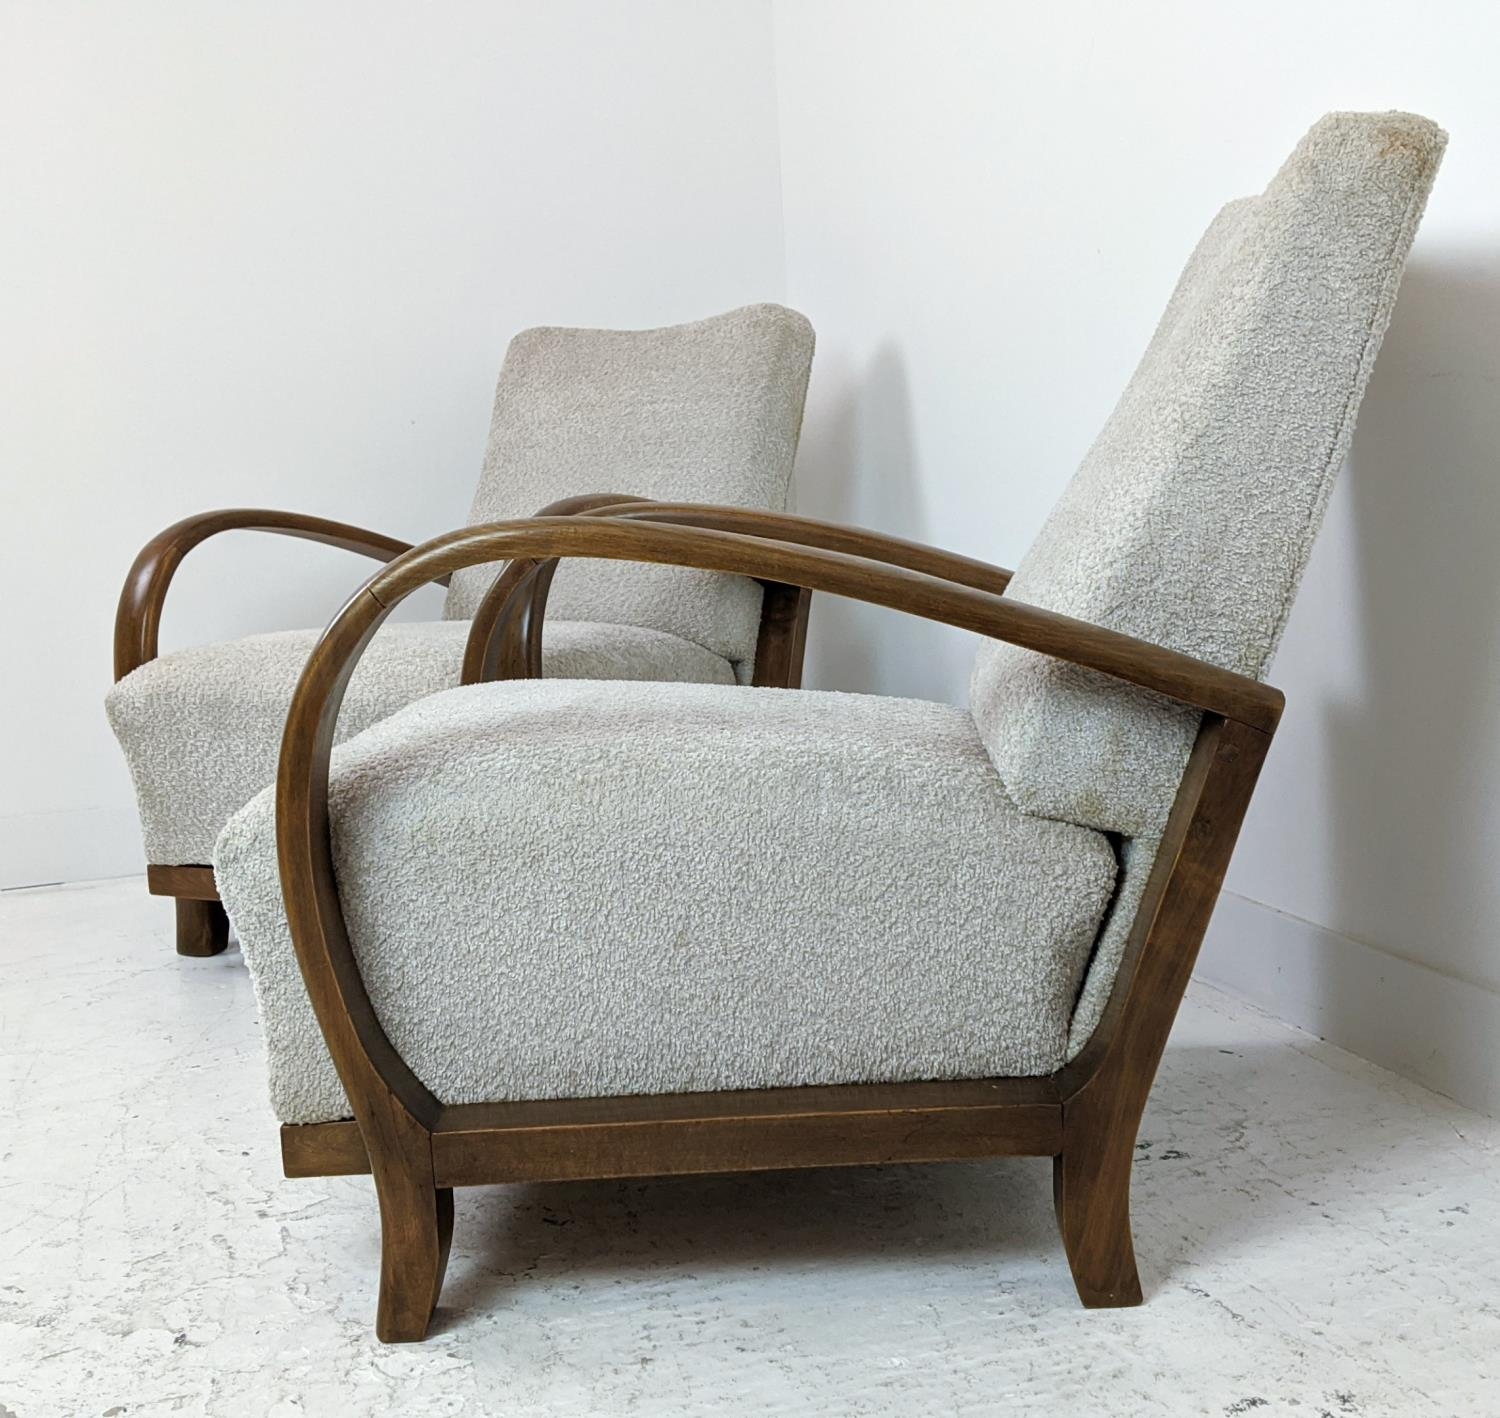 HALABALA ARMCHAIRS, a pair, mid 20th century beechwood and boucle wool upholstered, 89cm H x 66cm - Image 5 of 8